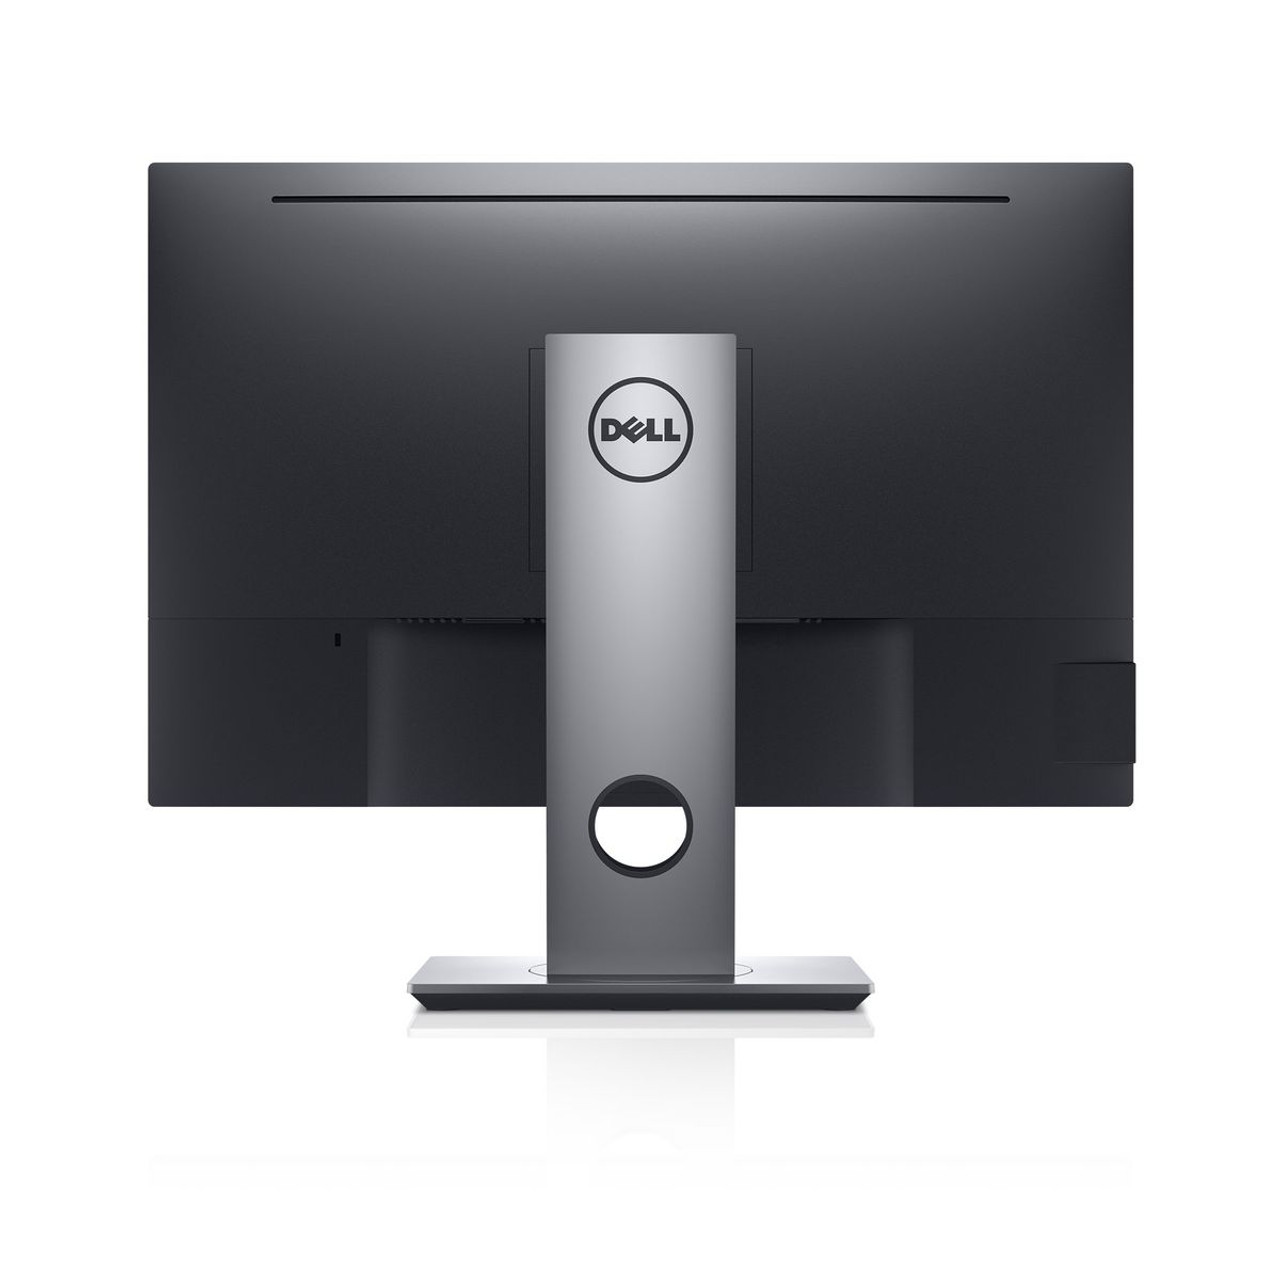 Dell P2418HZM 23.8-inch 16:9 IPS Monitor product image